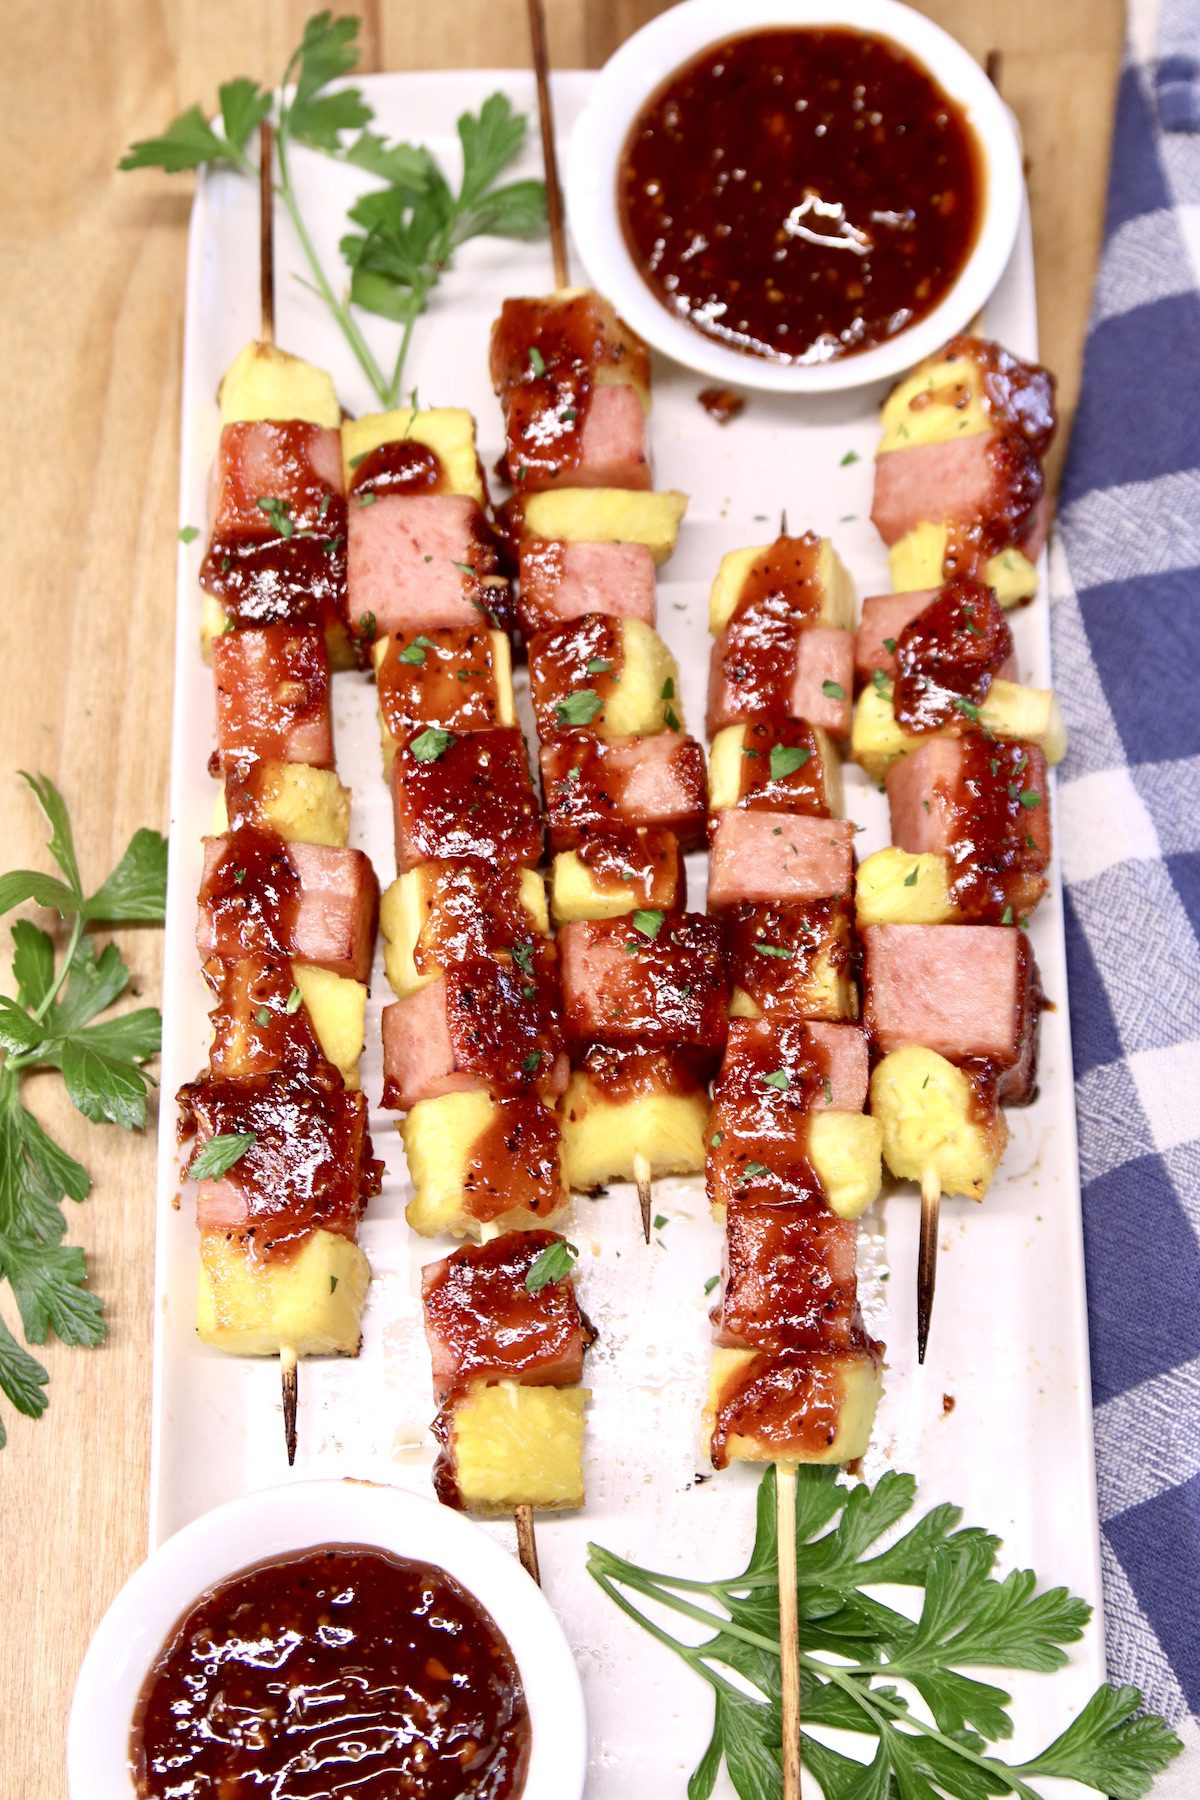 platter with spam and pineapple kabobs - 2 small bowls of bbq sauce, parsley garnish